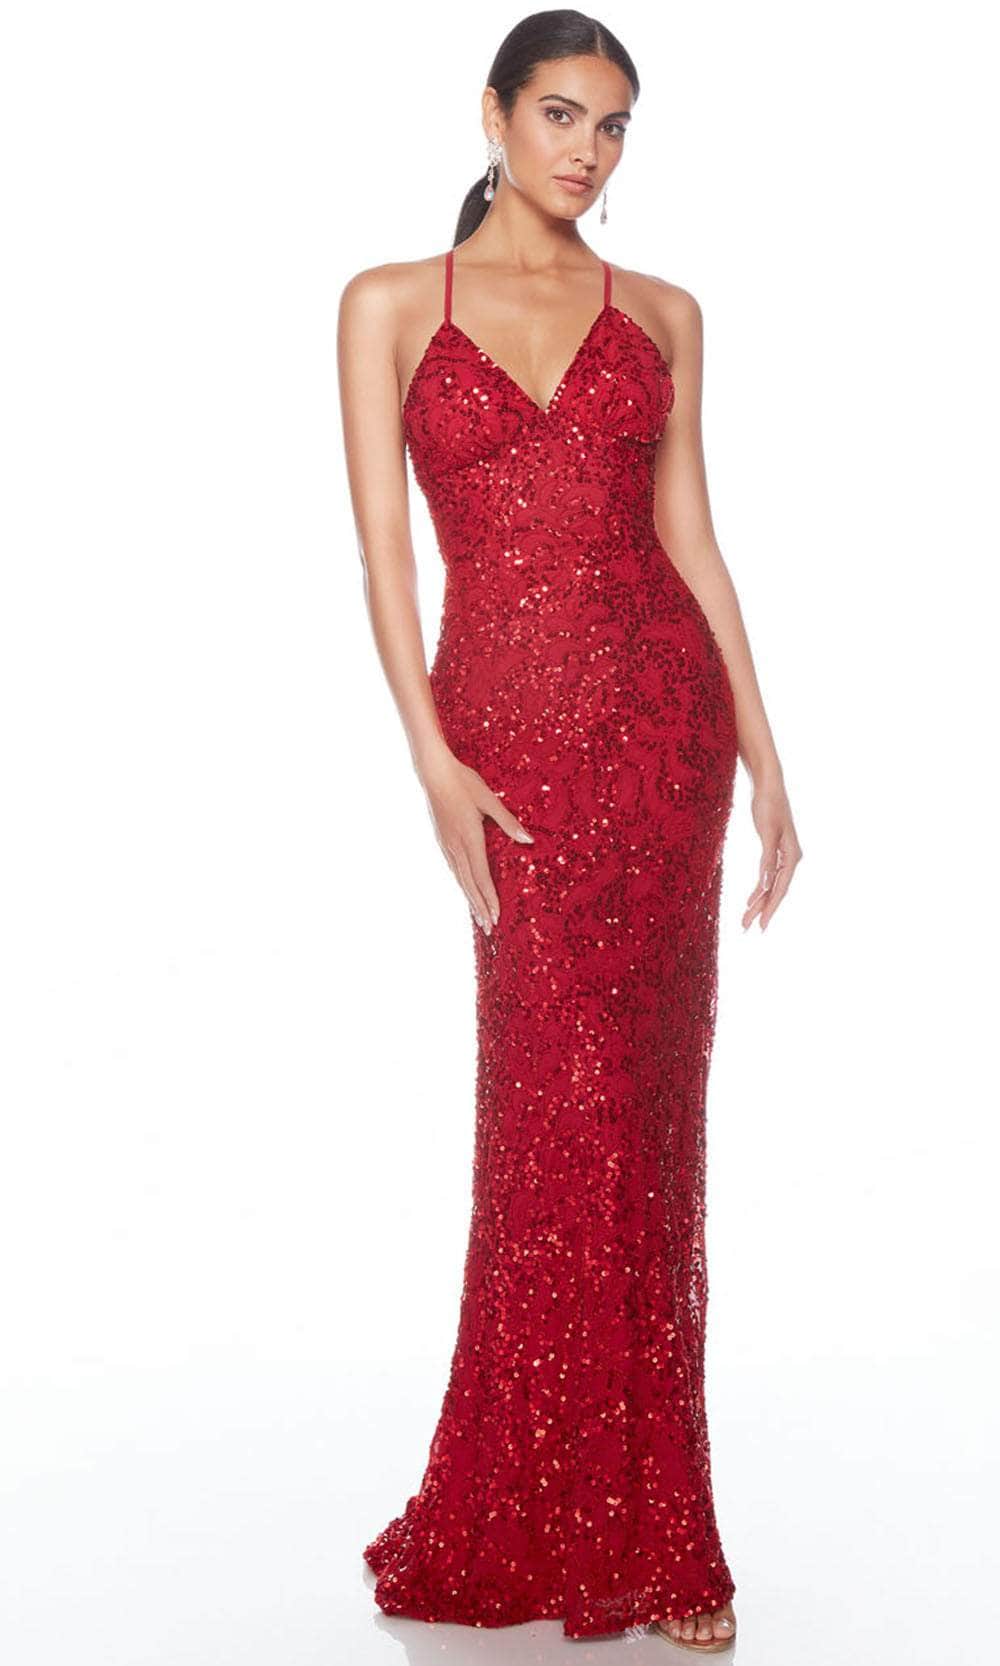 Alyce Paris 88009 - Bead Embellished Evening Dress Special Occasion Dress 000 / Red